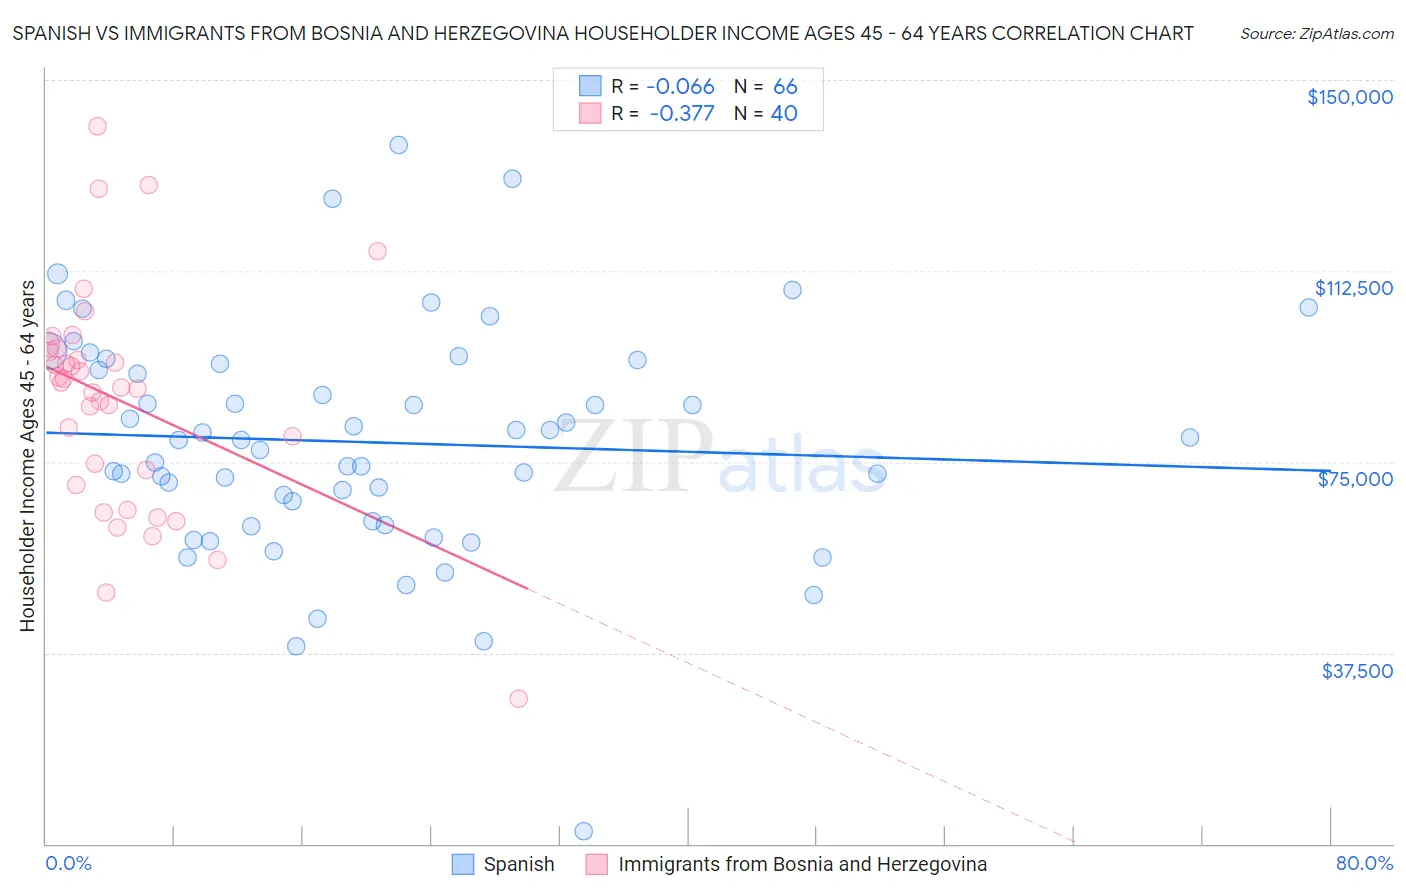 Spanish vs Immigrants from Bosnia and Herzegovina Householder Income Ages 45 - 64 years